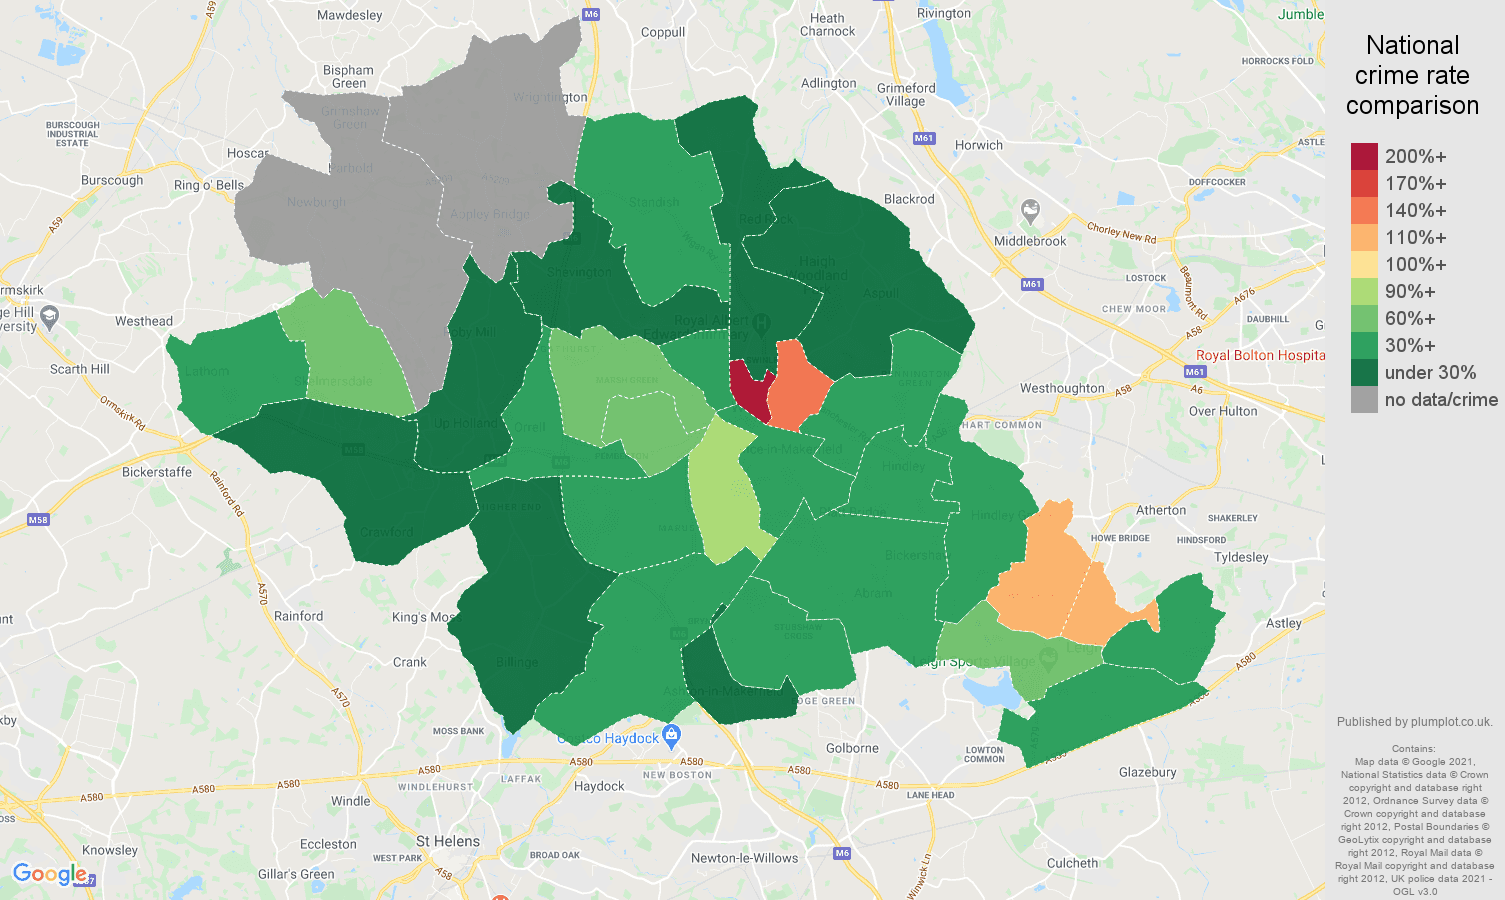 Wigan bicycle theft crime rate comparison map